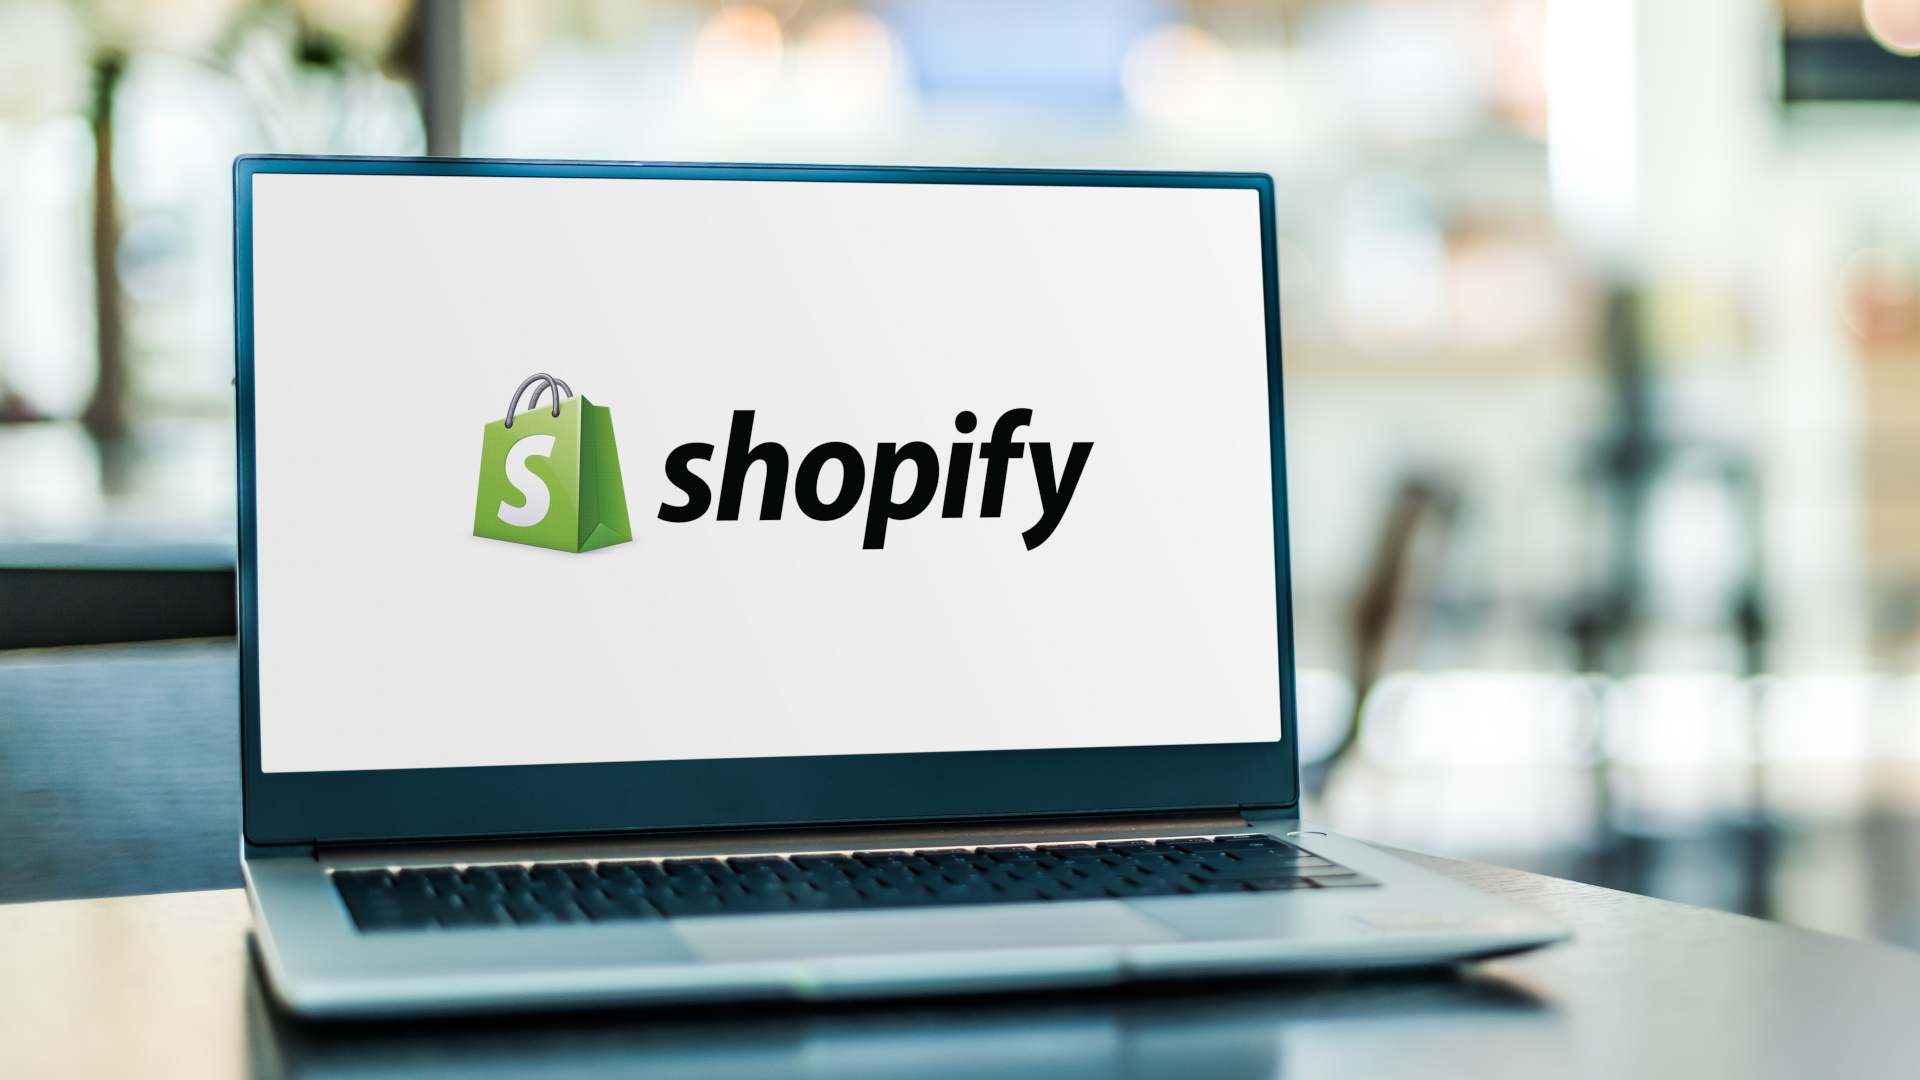 Shopify logo on computer